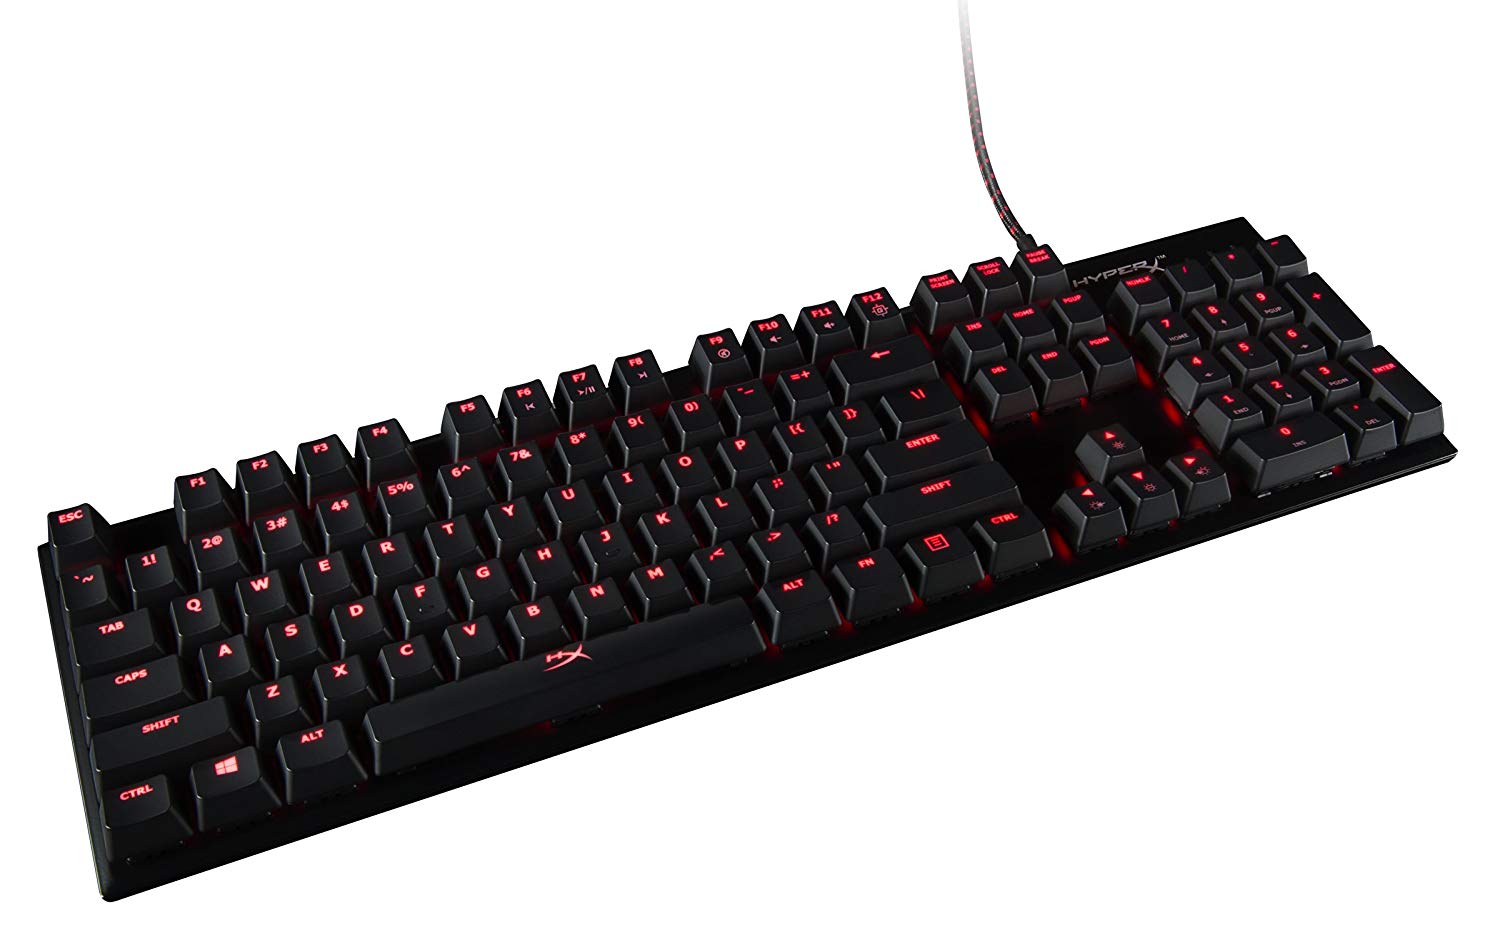 HyperX Alloy HX-KB1BR1-NA/A3 FPS Mechanical Gaming Keyboard (Cherry MX Brown)